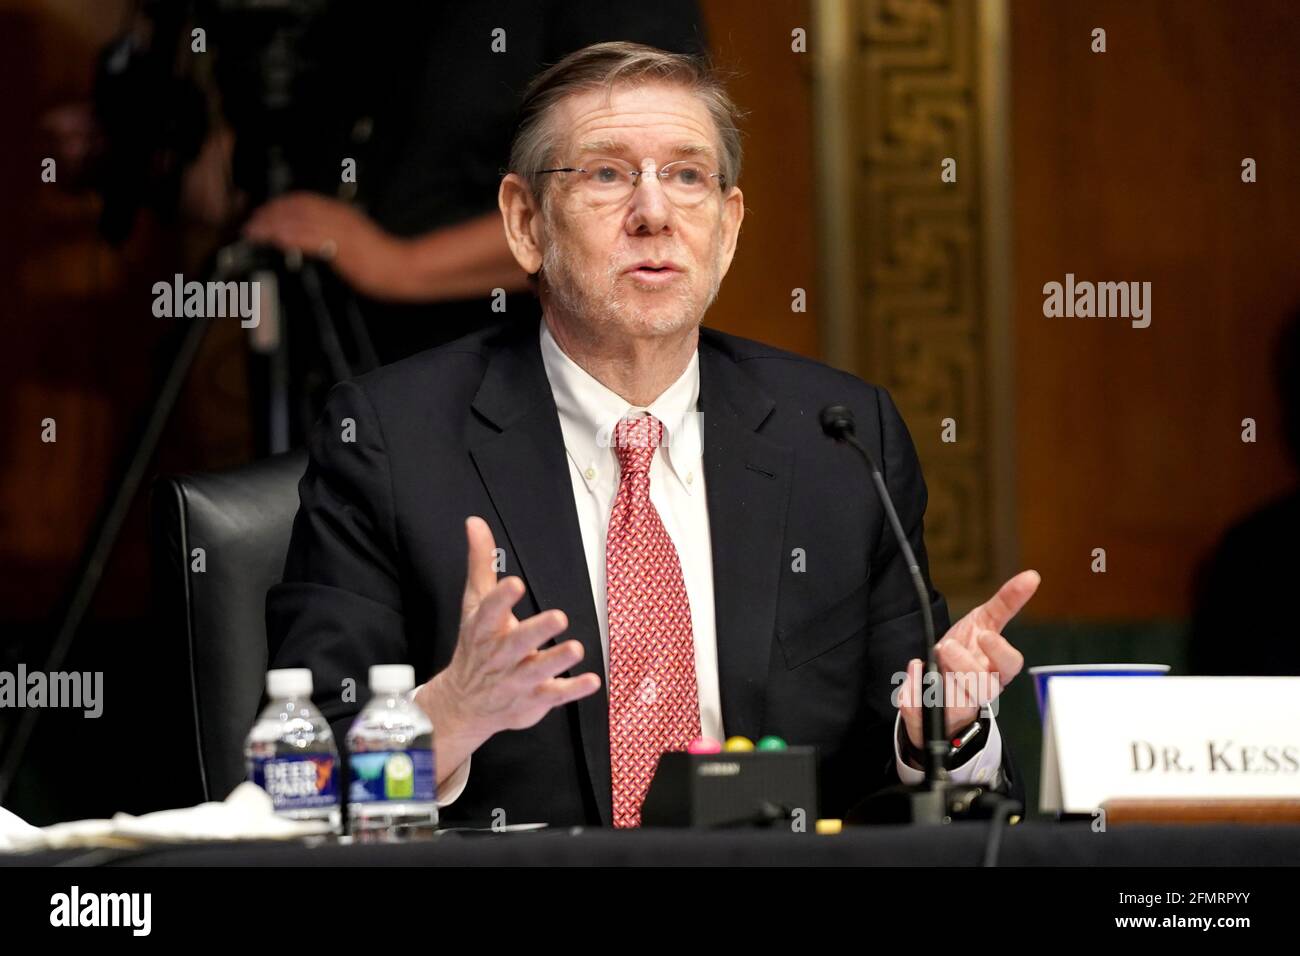 Department of Health and Human Services Chief Science Officer for Covid Response David Kessler answers a question during a Senate Health, Education, Labor and Pensions Committee hearing to discuss the on-going federal response to Covid-19 on Tuesday, May 11, 2021 at the U.S. Capitol in Washington, DCCredit: Greg Nash/Pool via CNP | usage worldwide Stock Photo